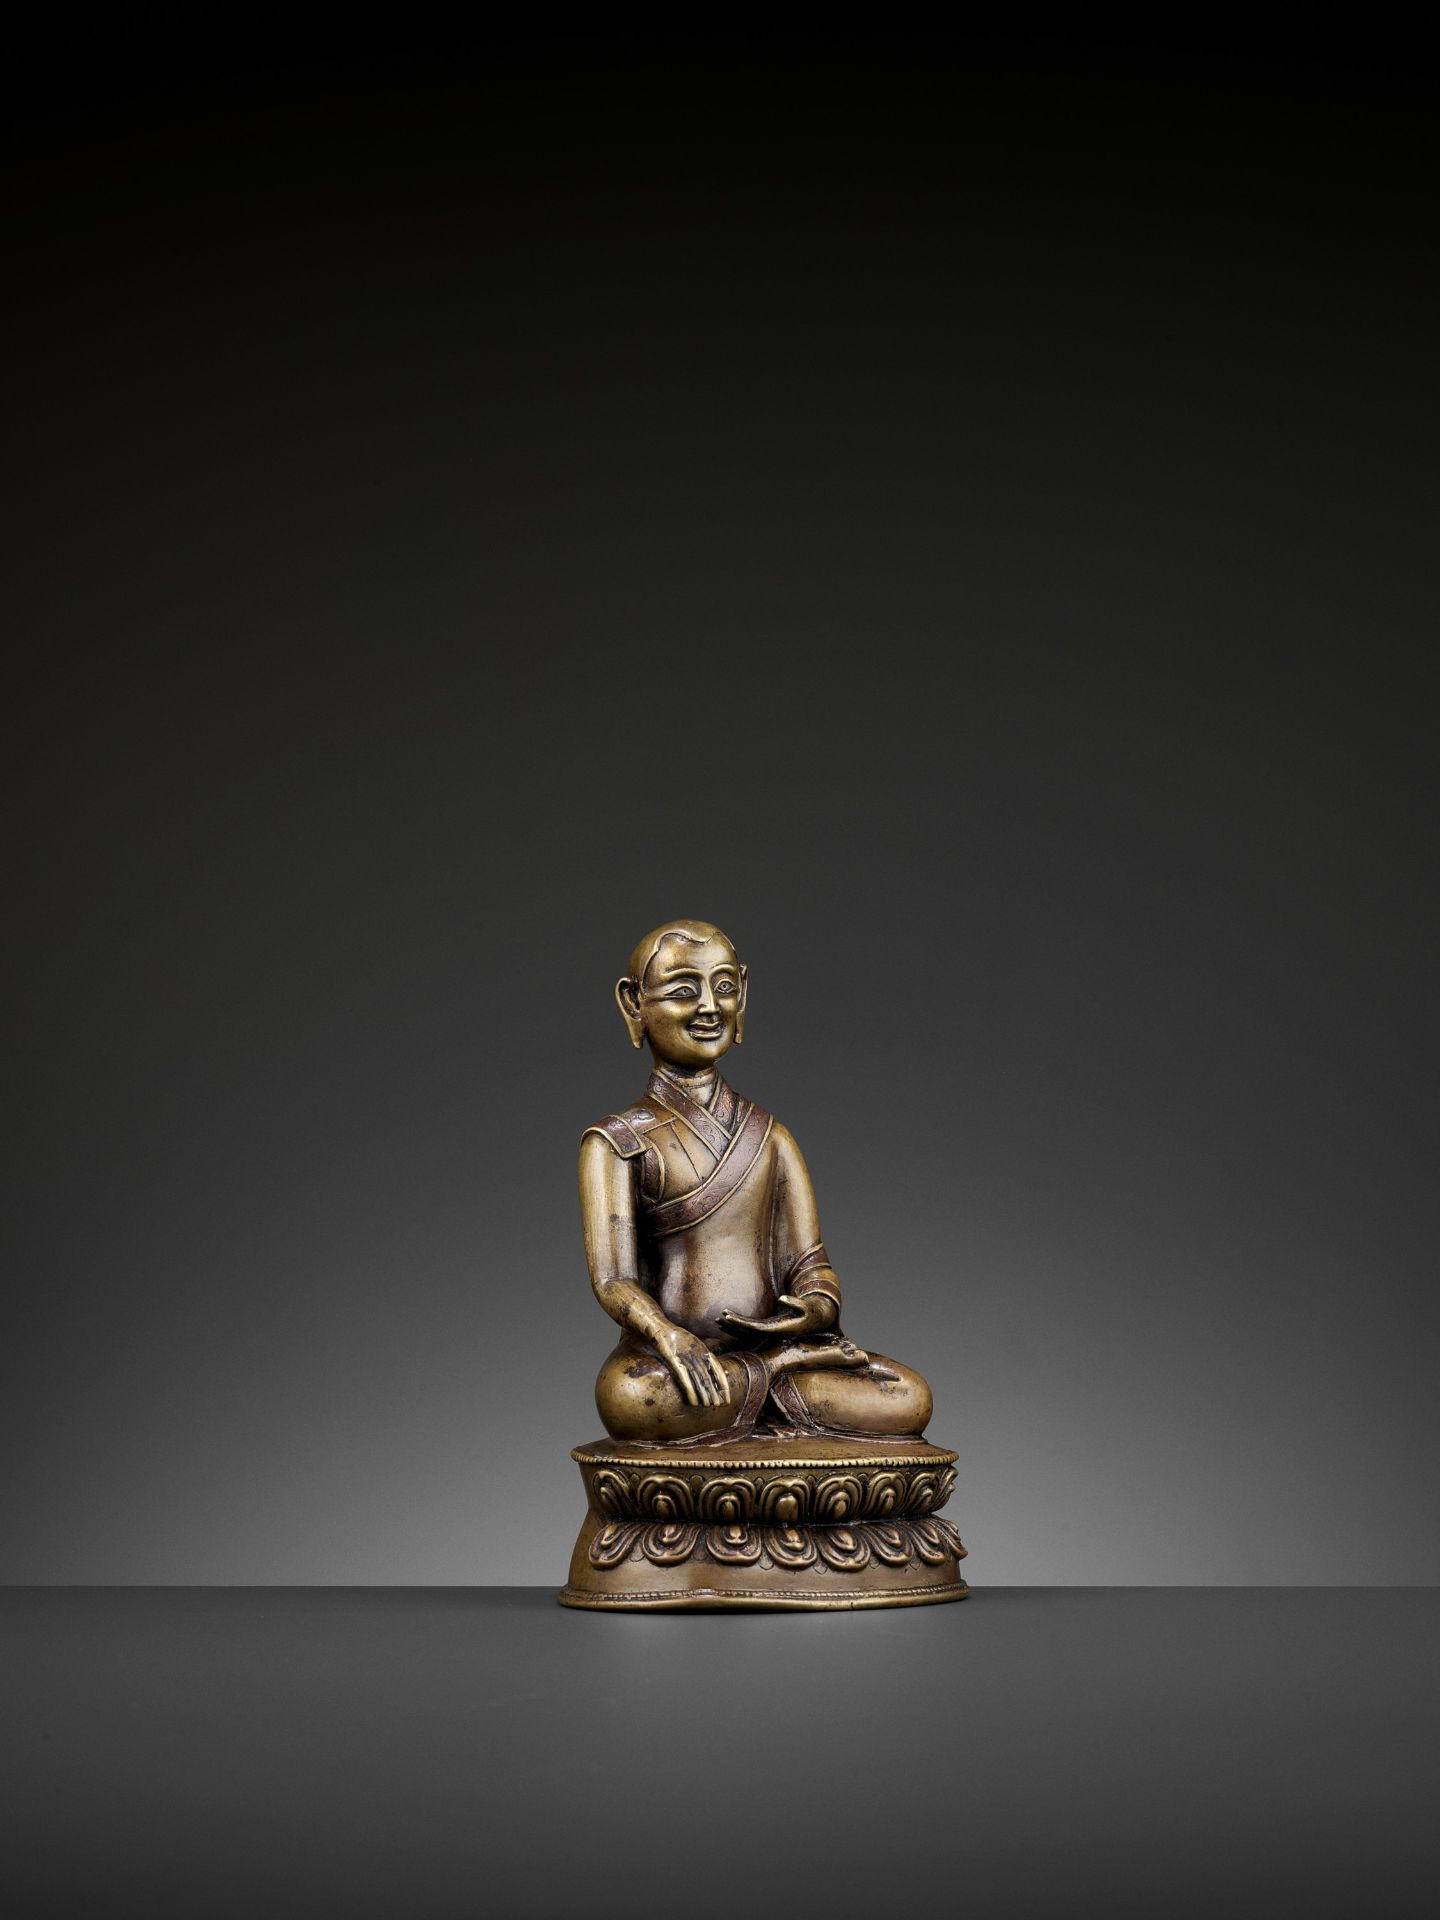 A PORTRAIT BRONZE OF A MONK, COPPER- AND SILVER-INLAID, 16TH-18TH CENTURY - Image 9 of 12